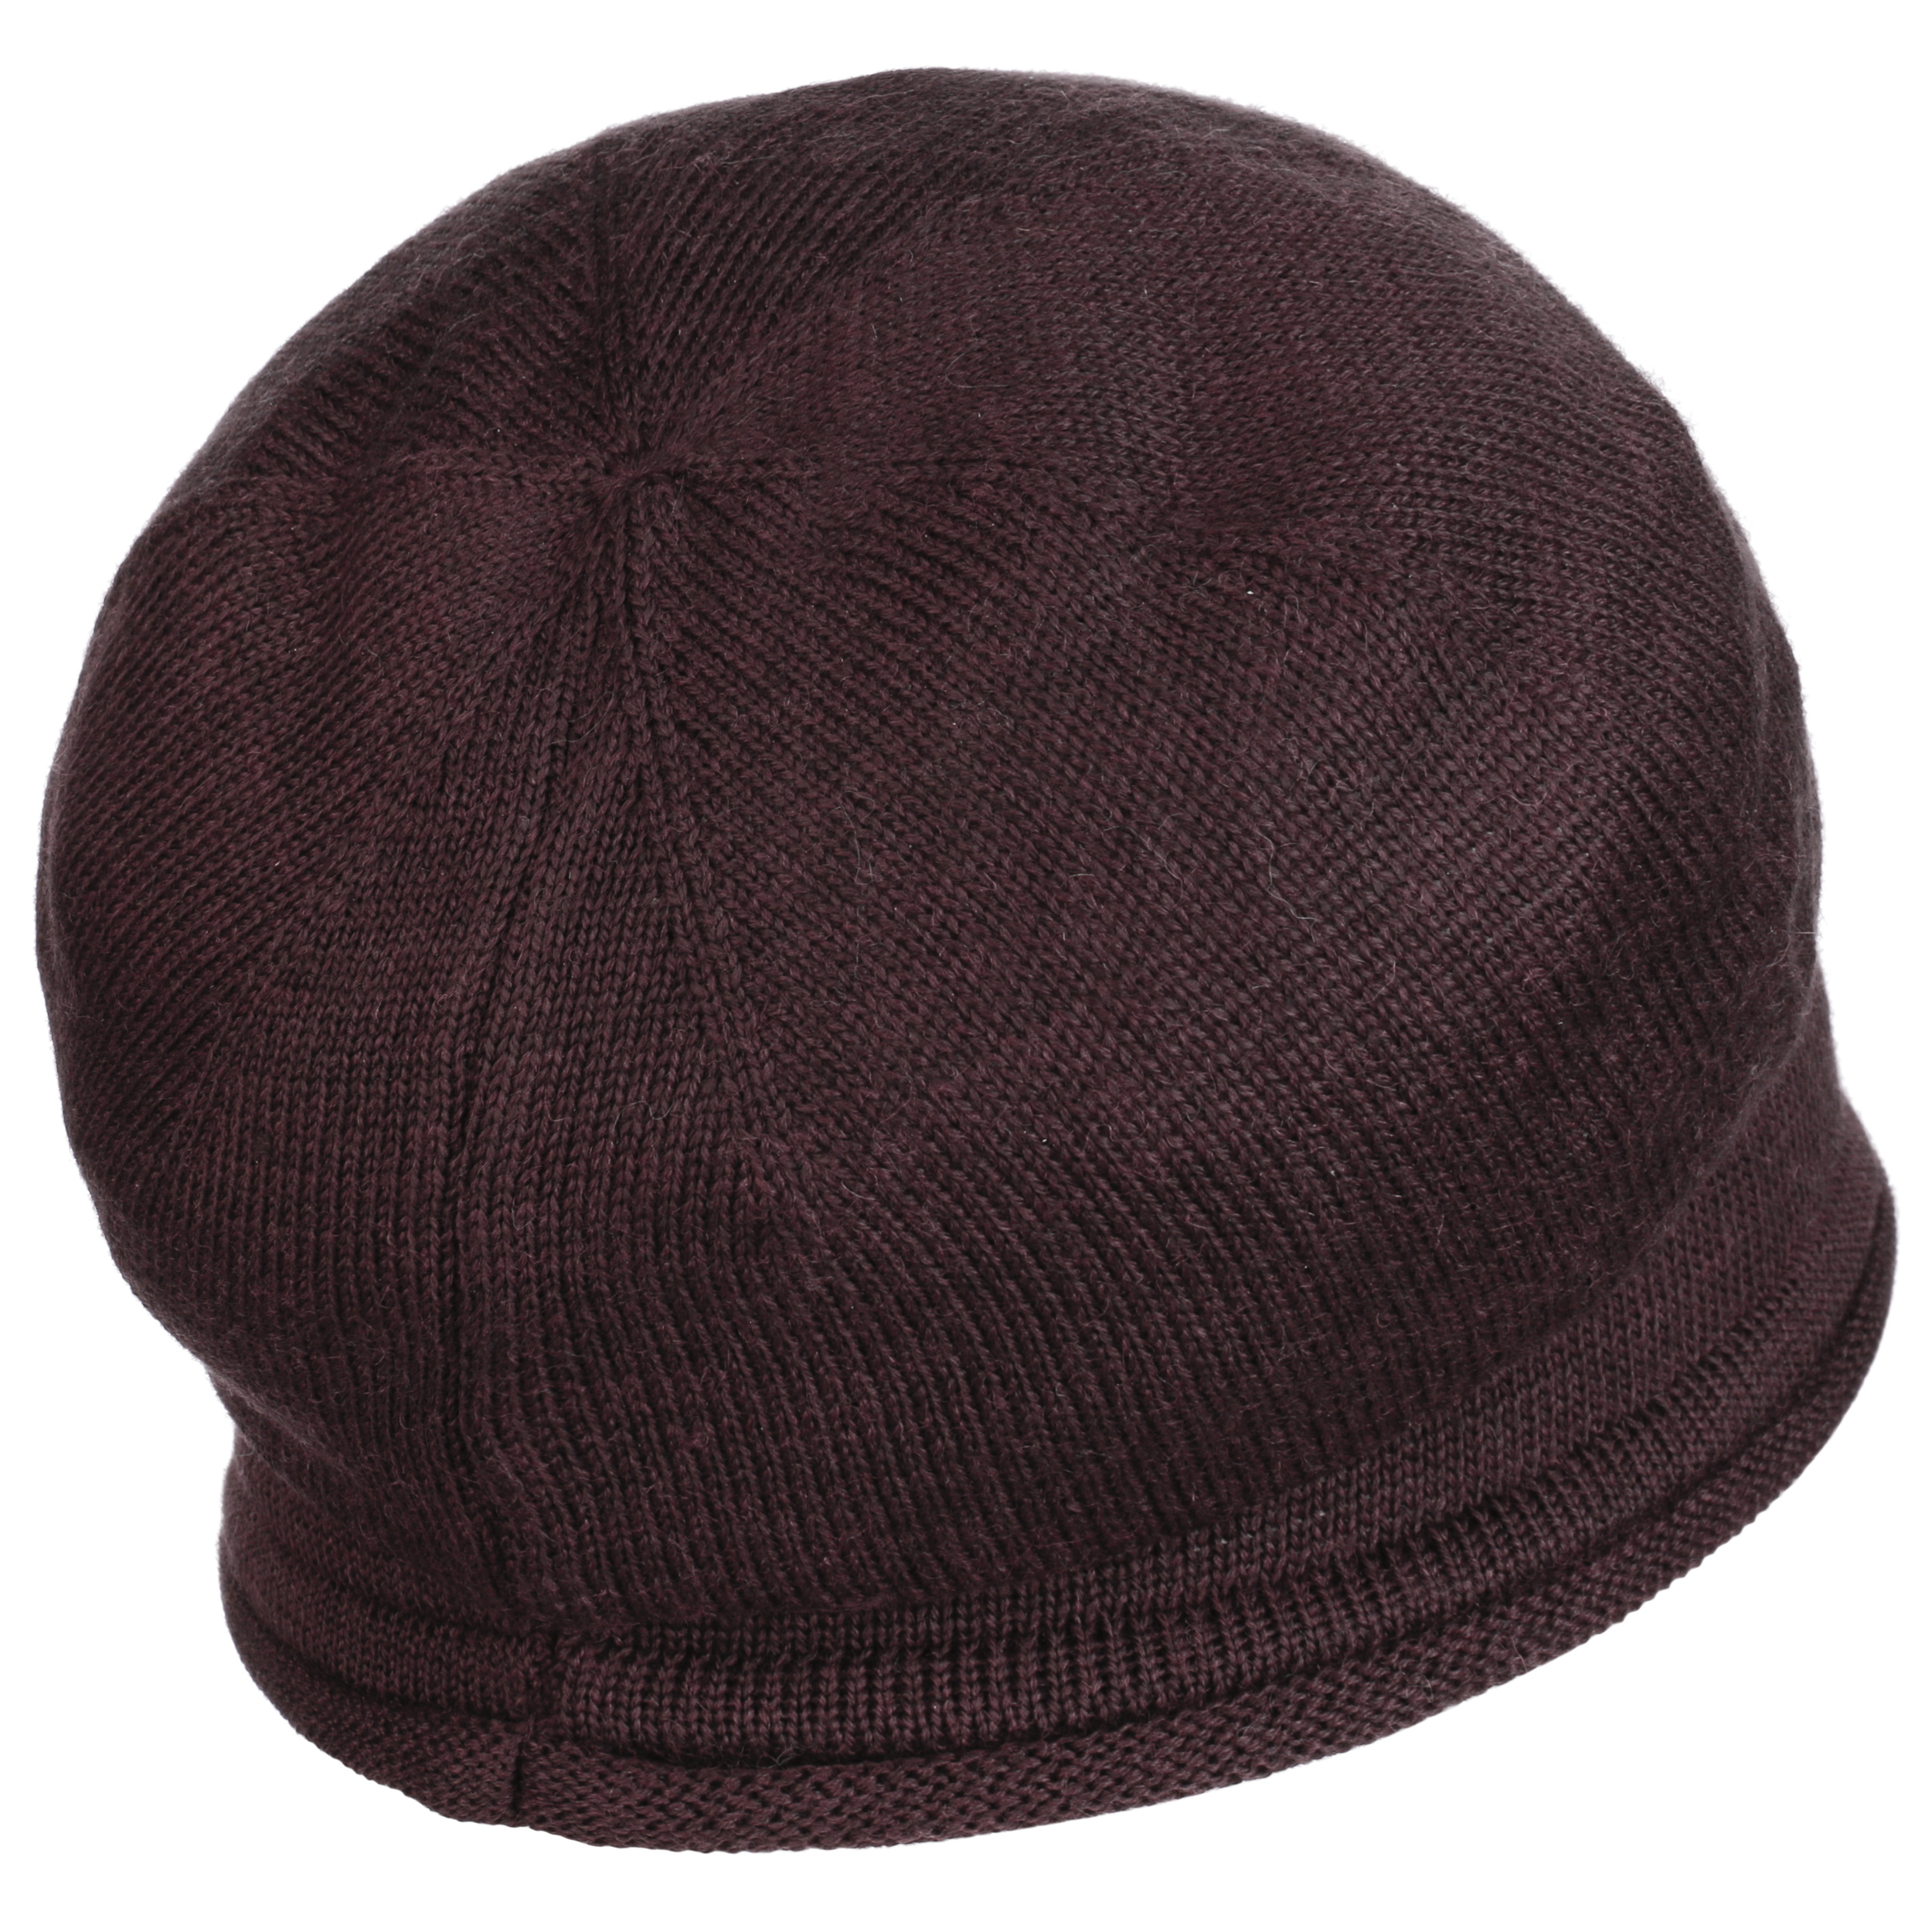 Leicester Oversize Beanie by Chillouts - 24,95 £